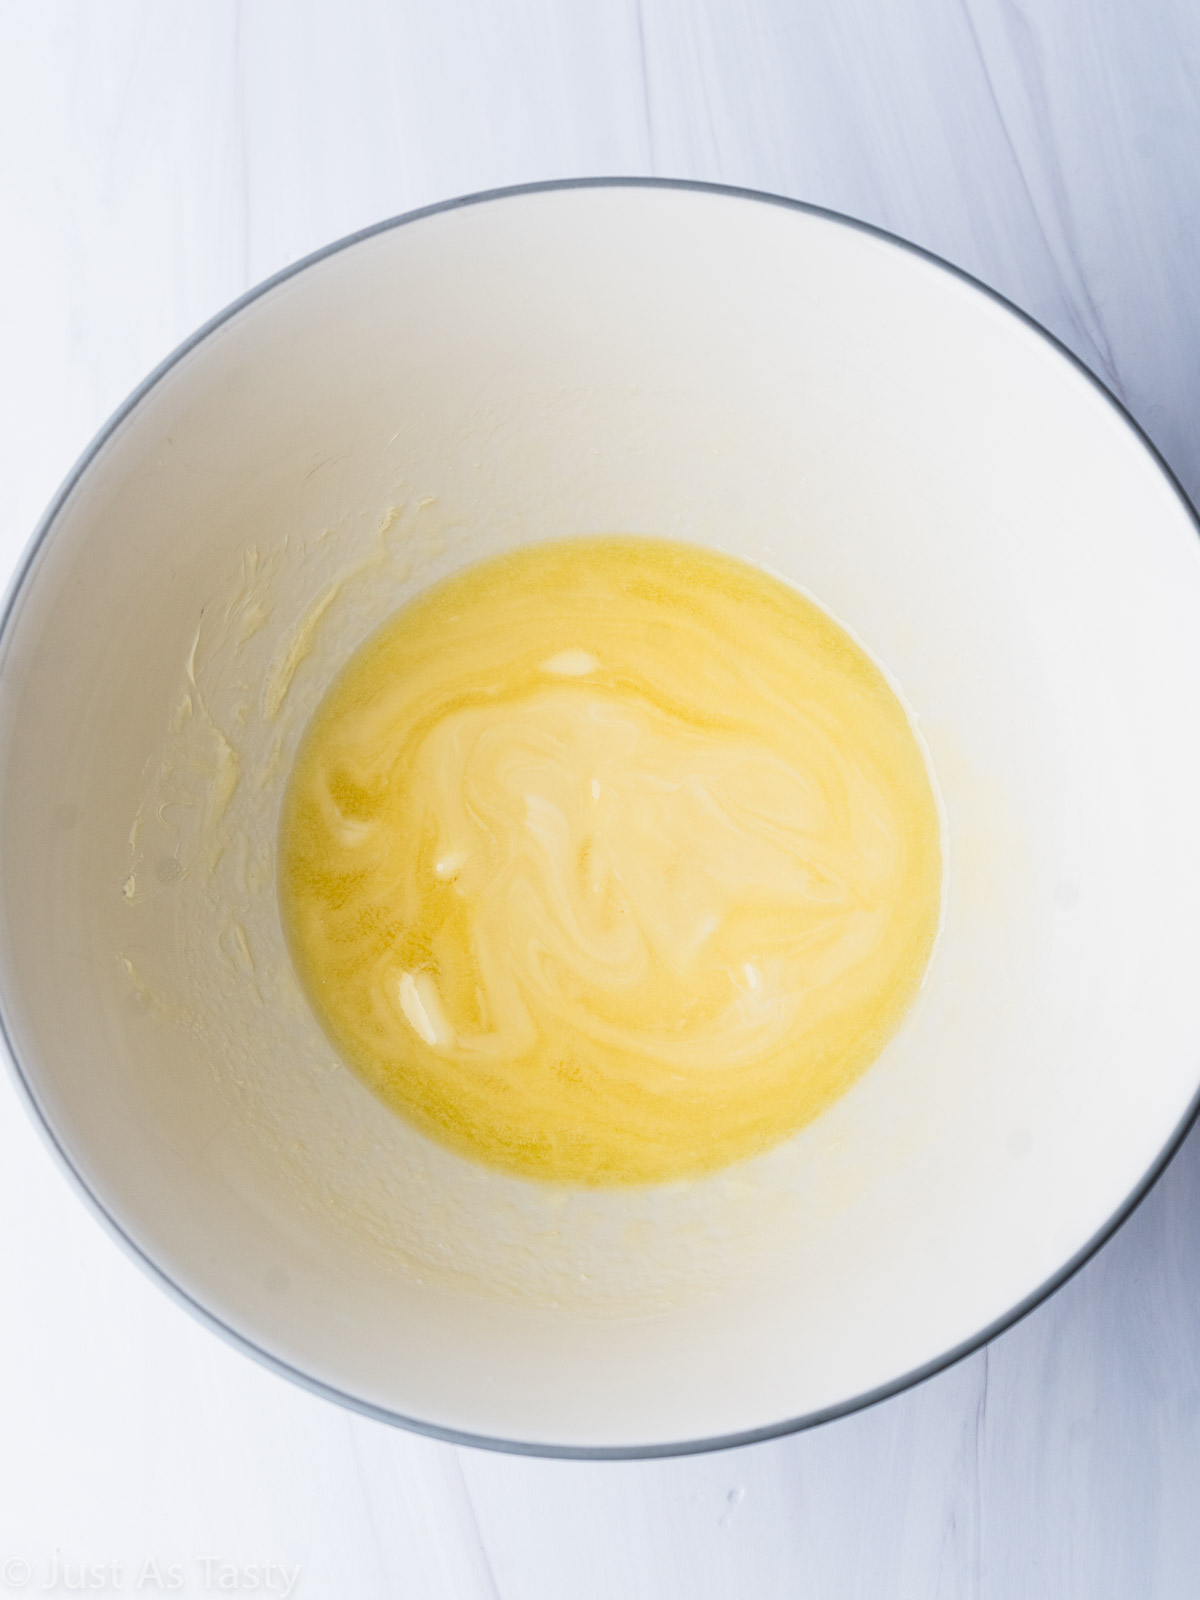 Melted butter and white chocolate in a bowl.